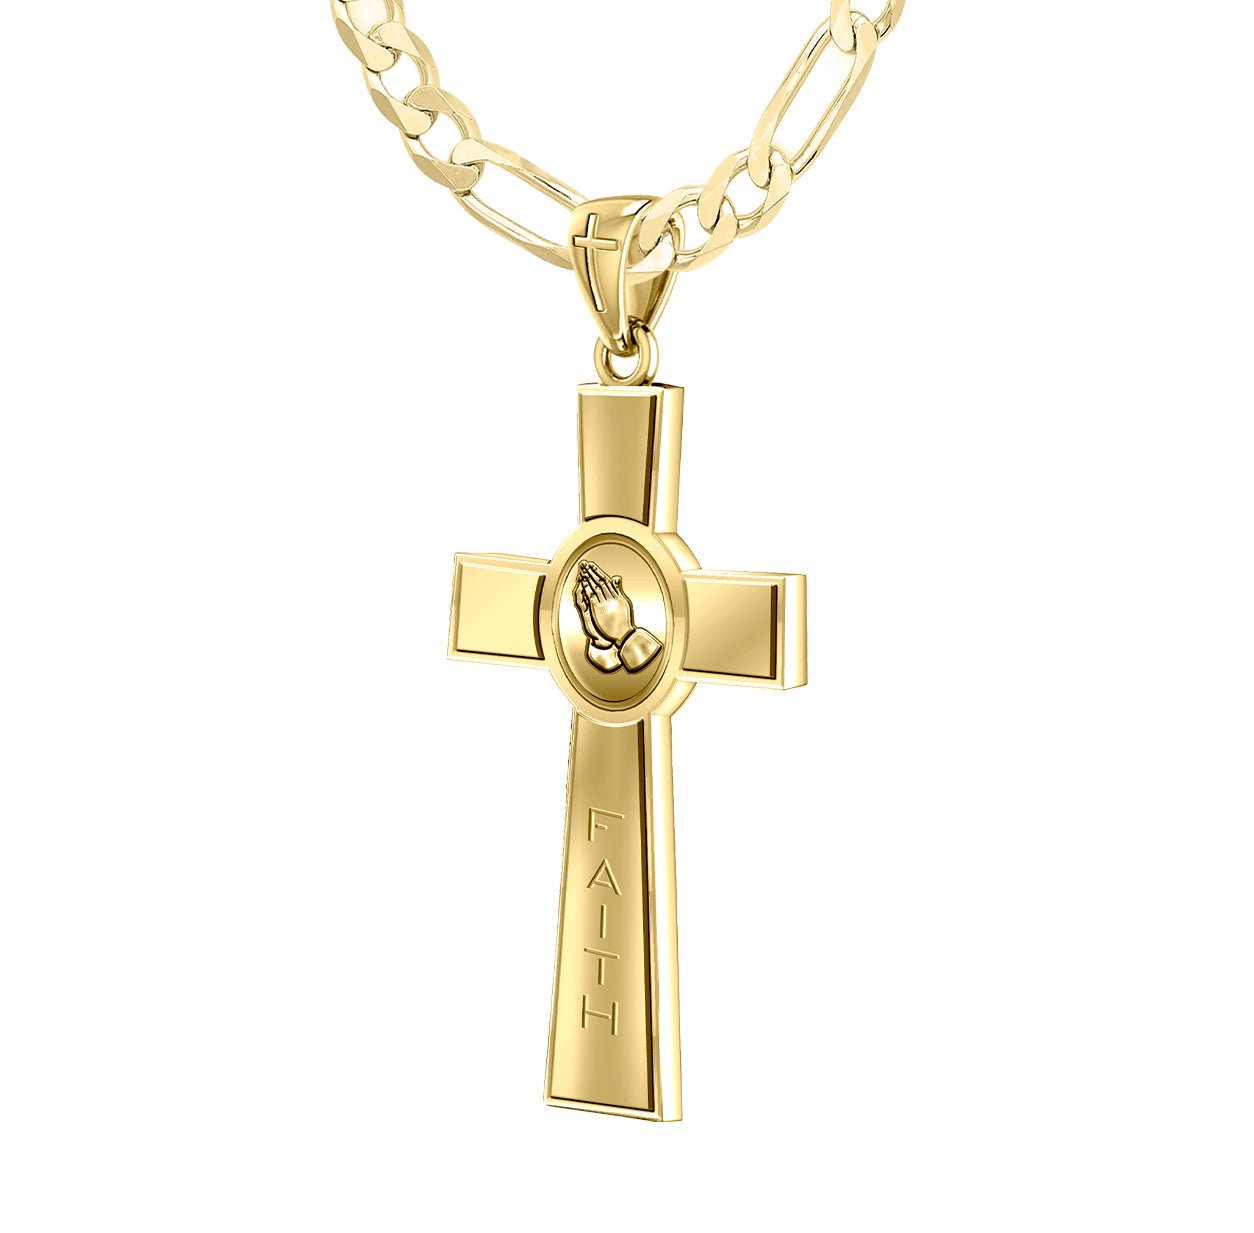 Men's Heavy Solid 14k Yellow Prayer Faith Cross Pendant Necklace, Polished Finish 45mm - US Jewels